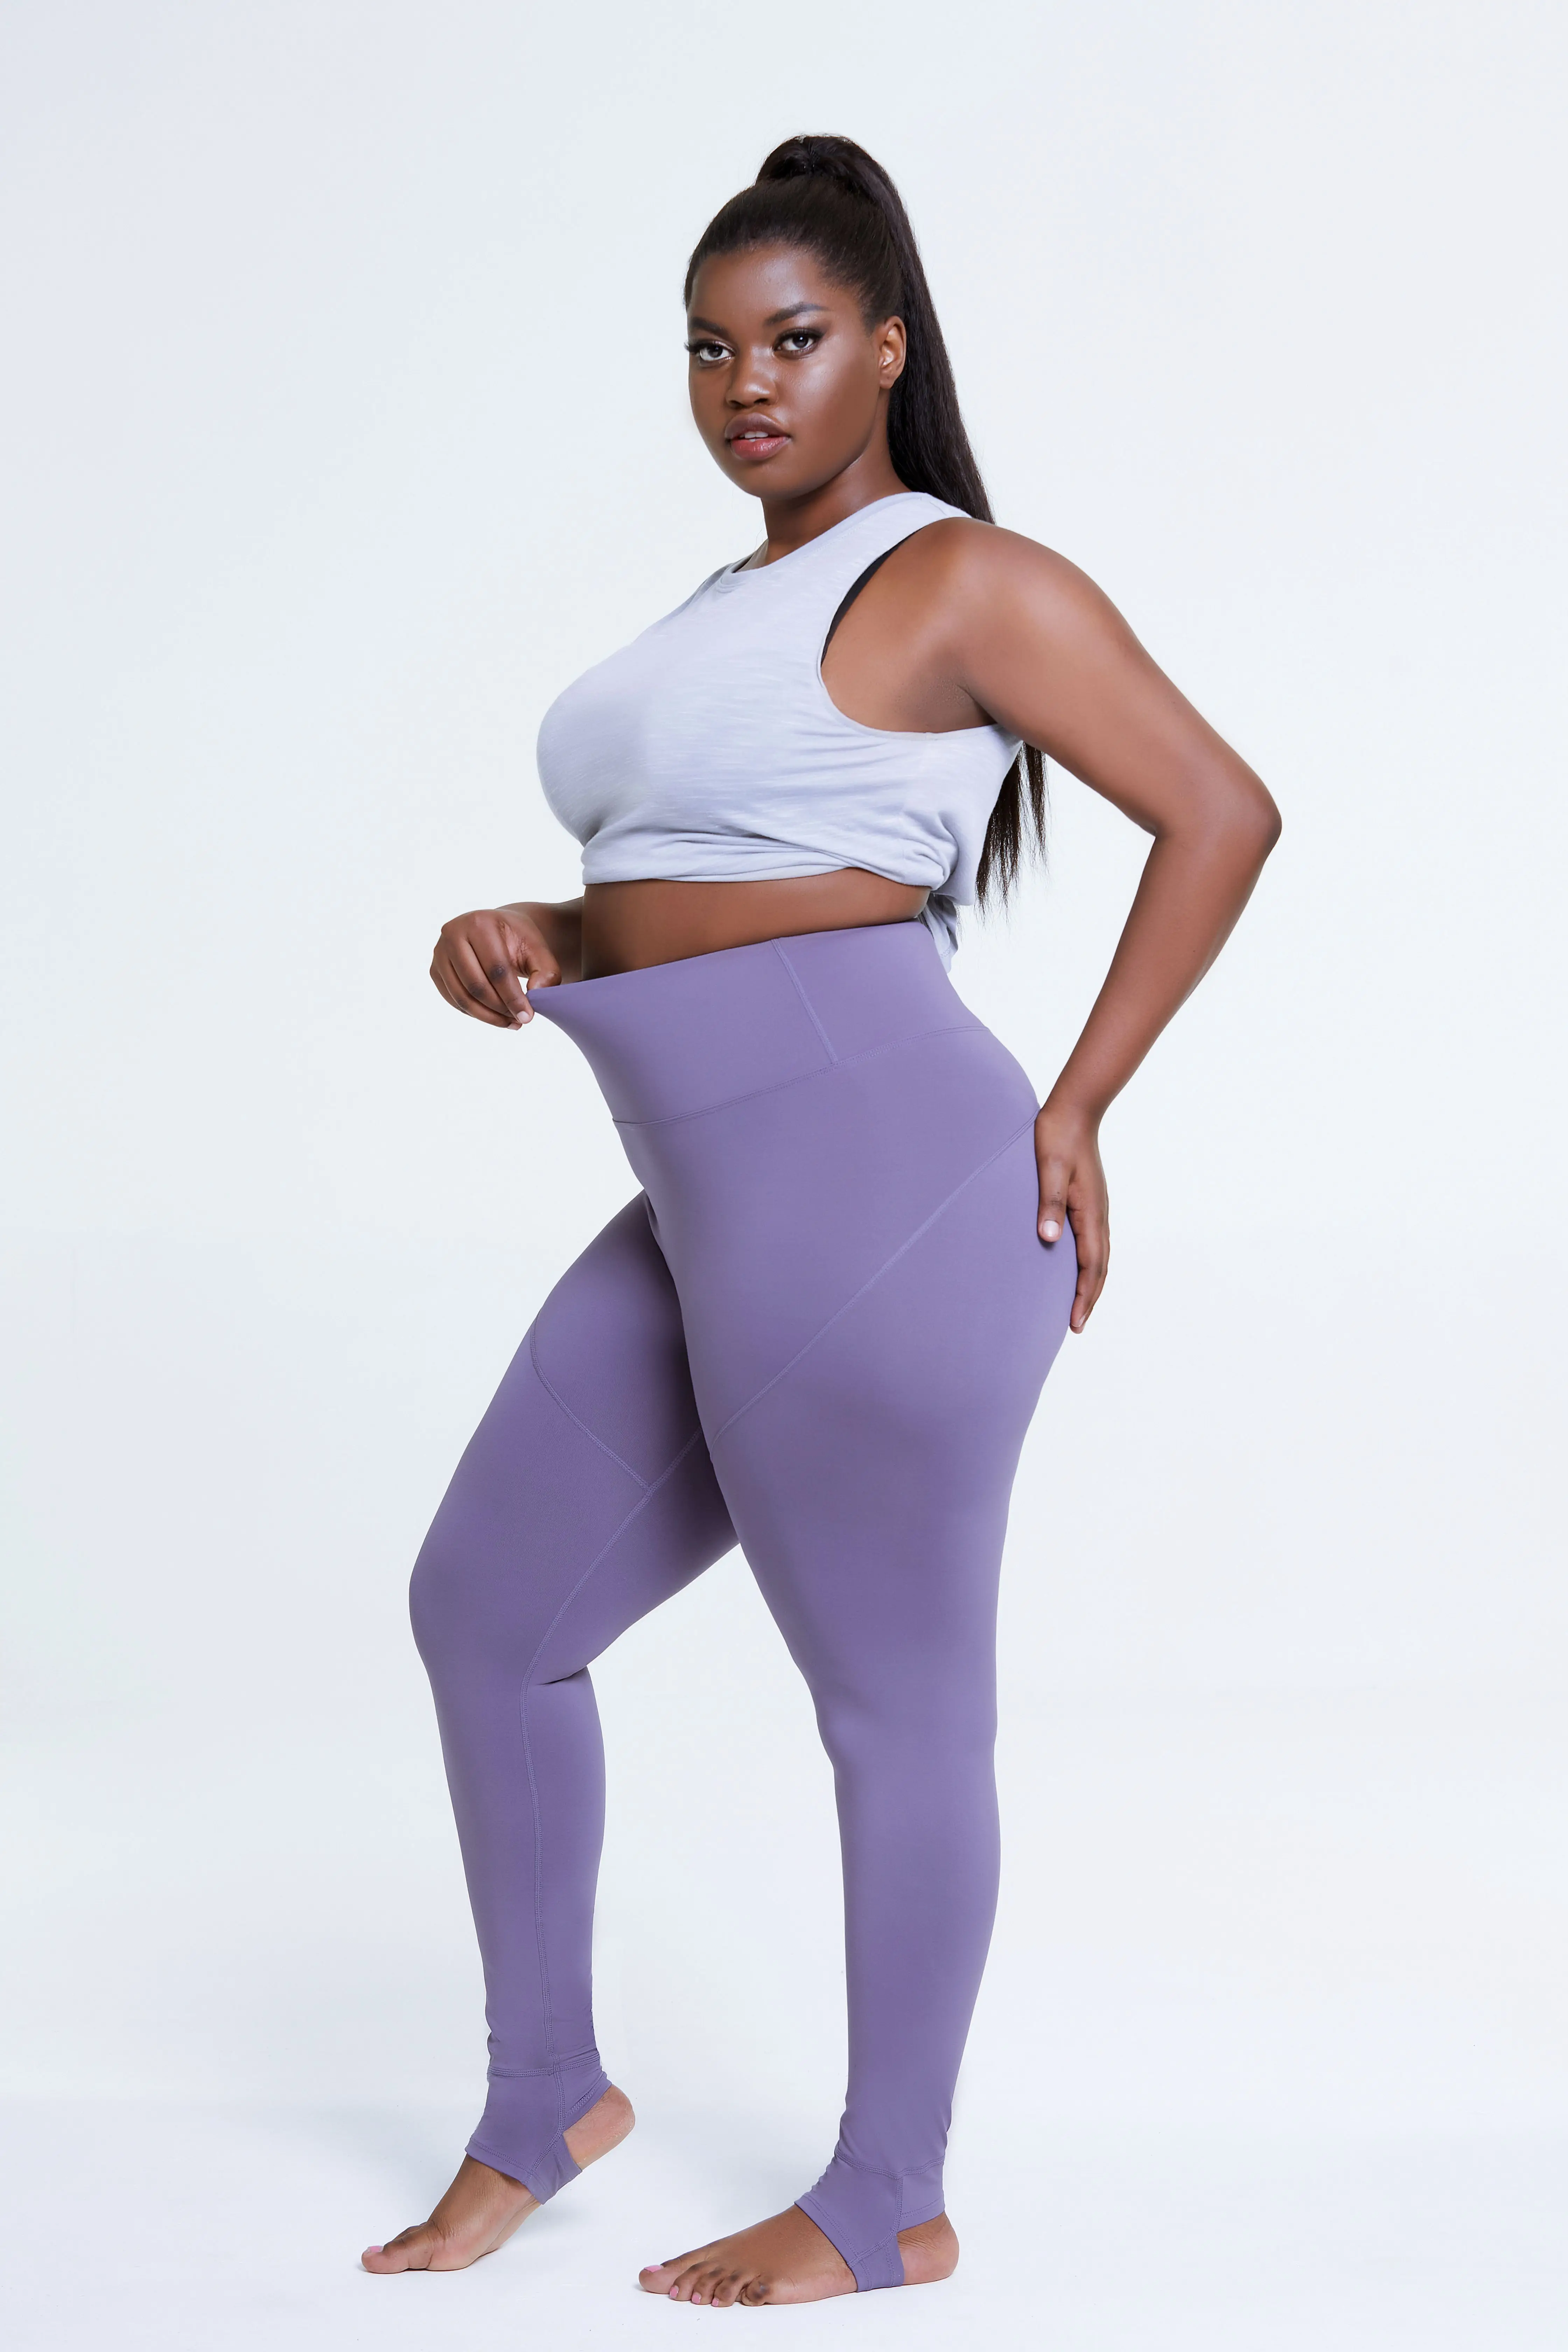 Fat Chick Yoga Pants Porn - Women Plus Size Naked Feeling Yoga Leggings Xxxxl No Camel Toe High Waist  Step-on Fitness Yoga Pants Leggings For Fat Lady - Buy 2021 New Fashion  High Quality Activewear Plus Size Fitness